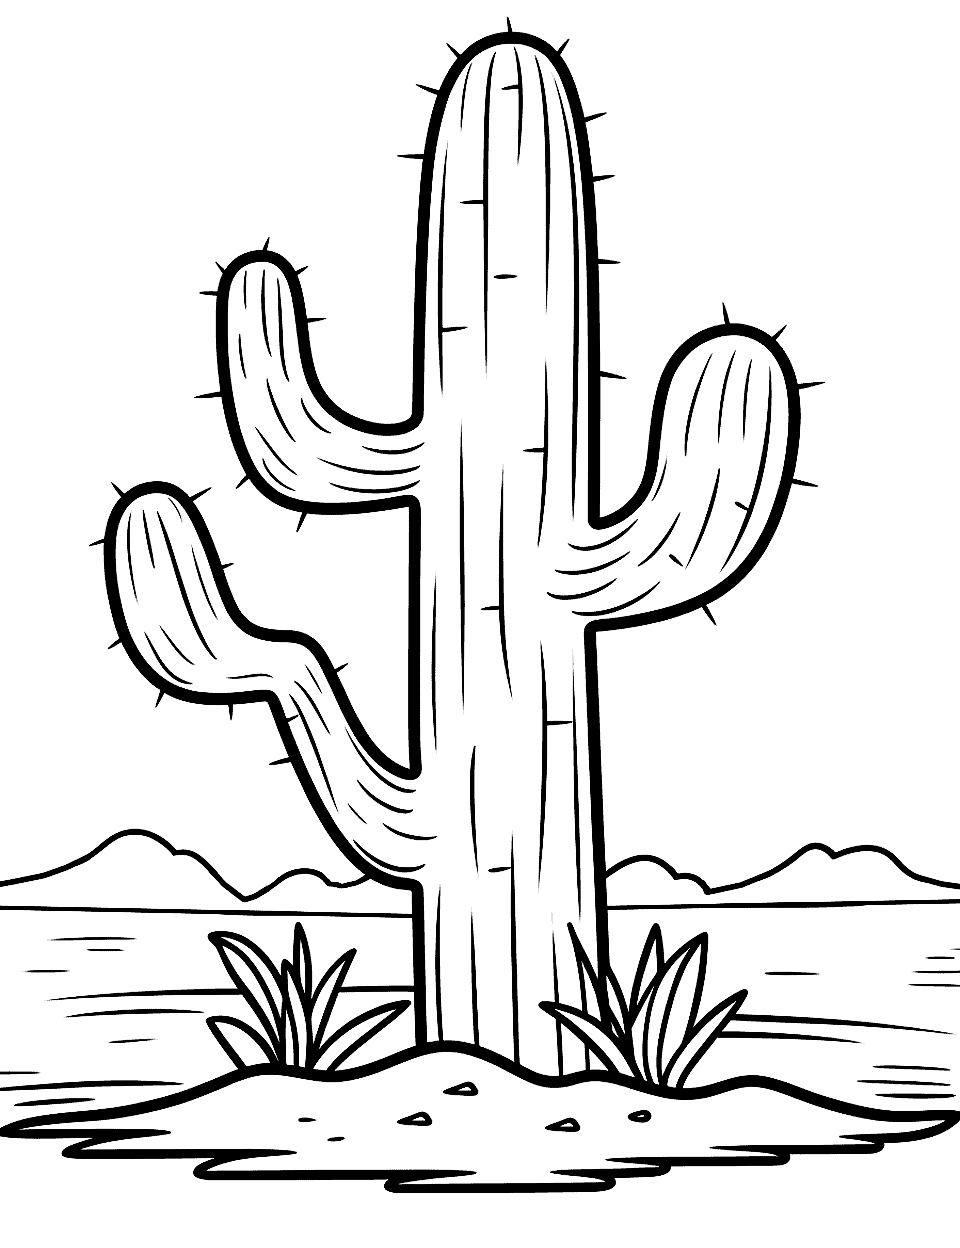 Cactus on a Desert Island Coloring Page - A solitary cactus on a small desert island surrounded by water.